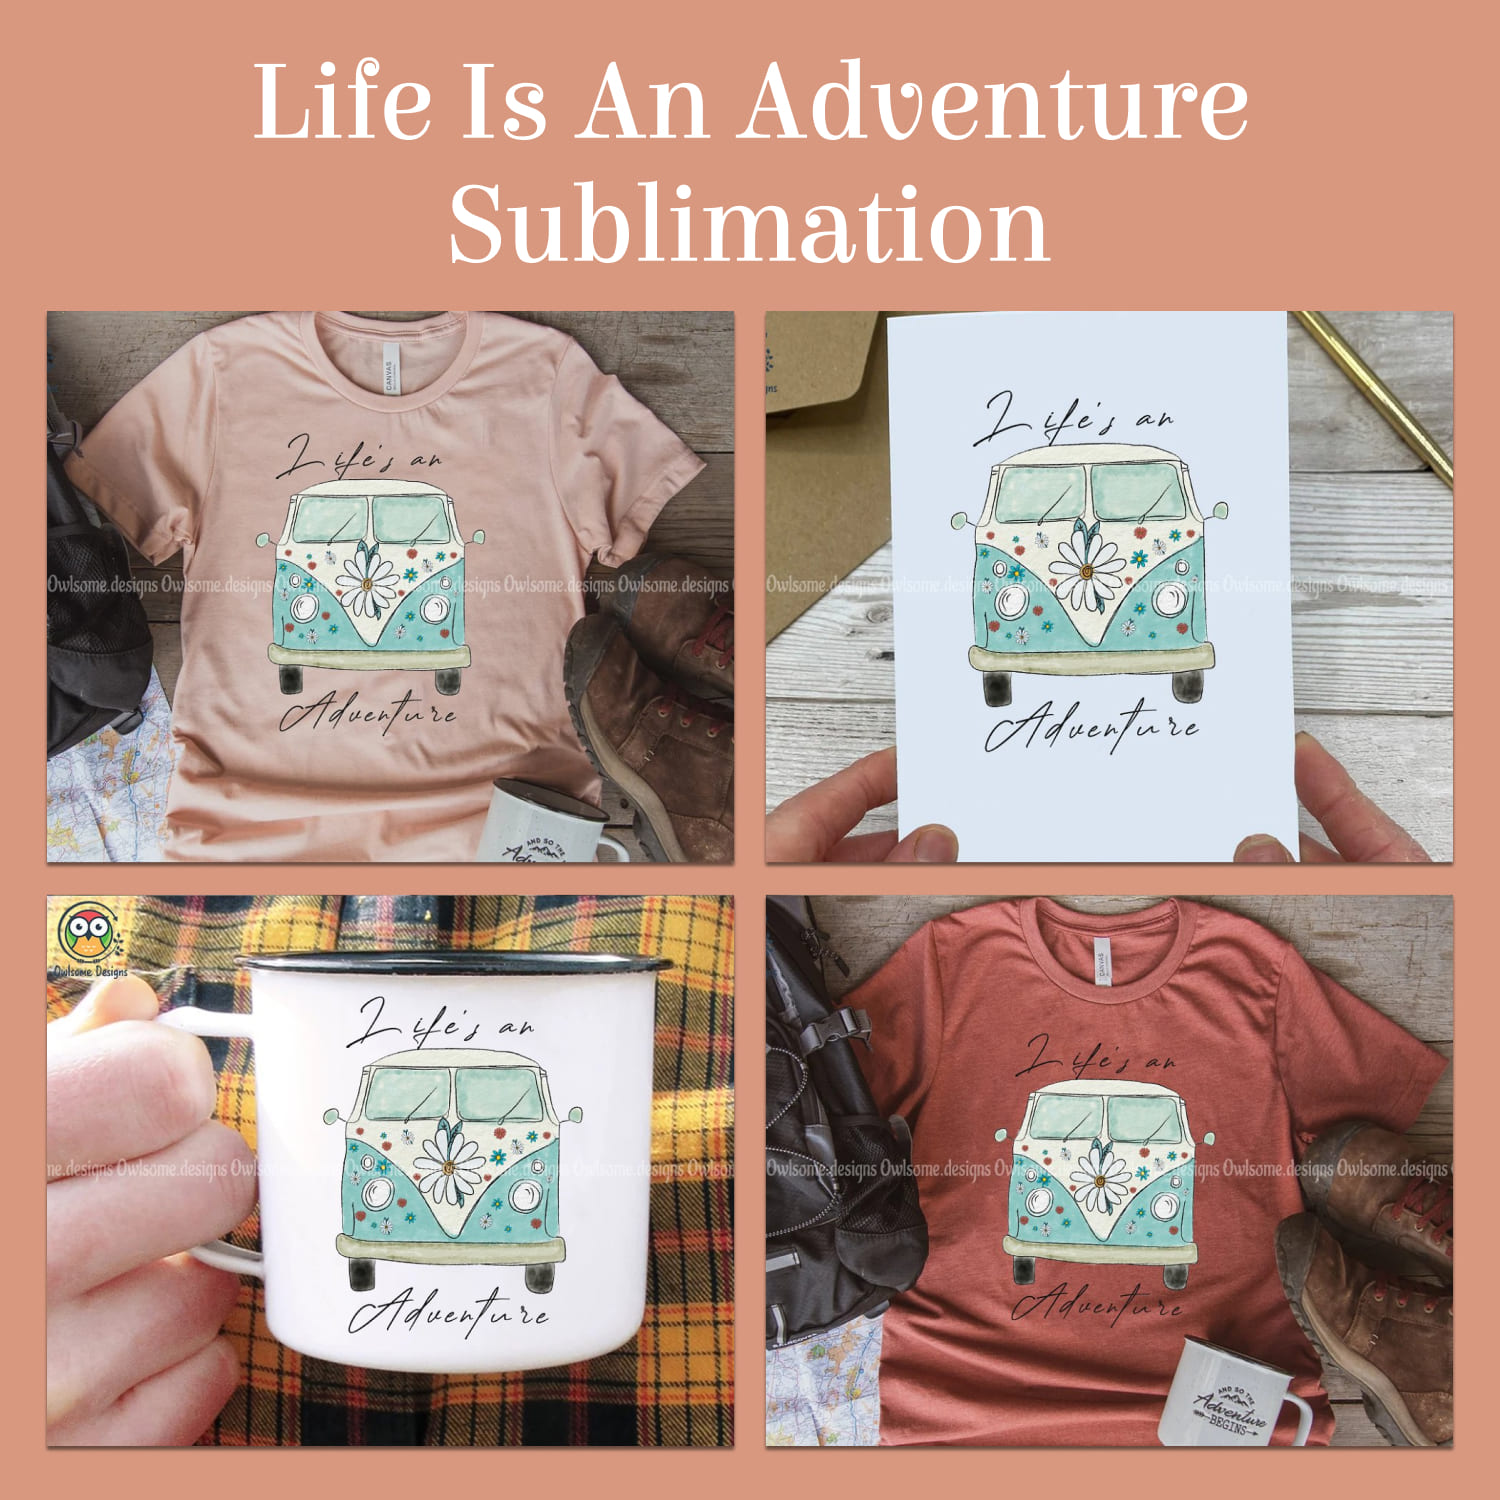 Life Is An Adventure Sublimation.